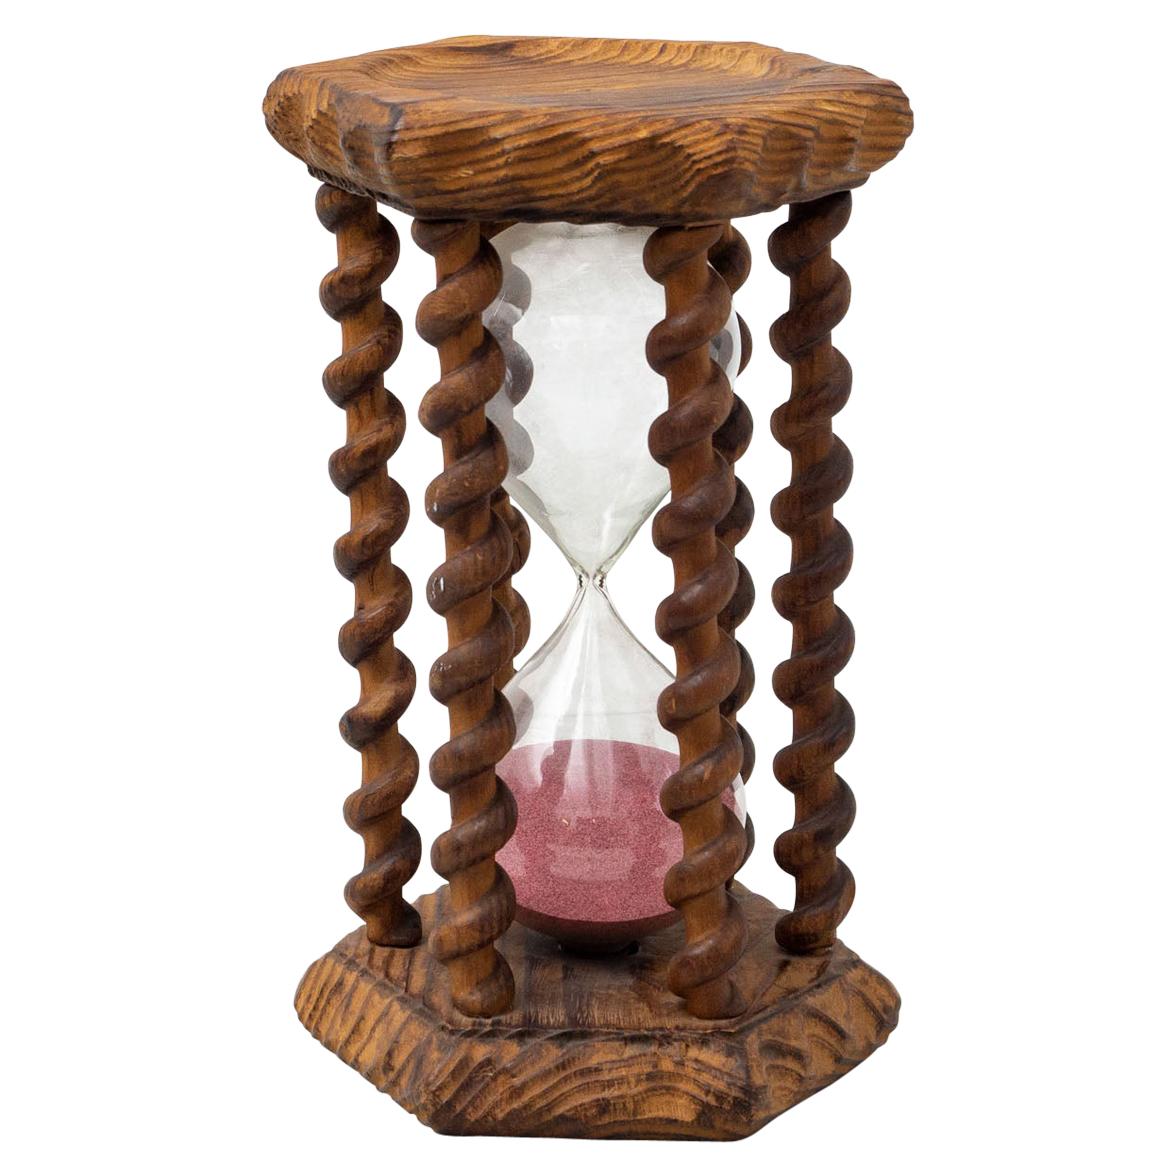 Antique French Wood Hourglass, circa 1940